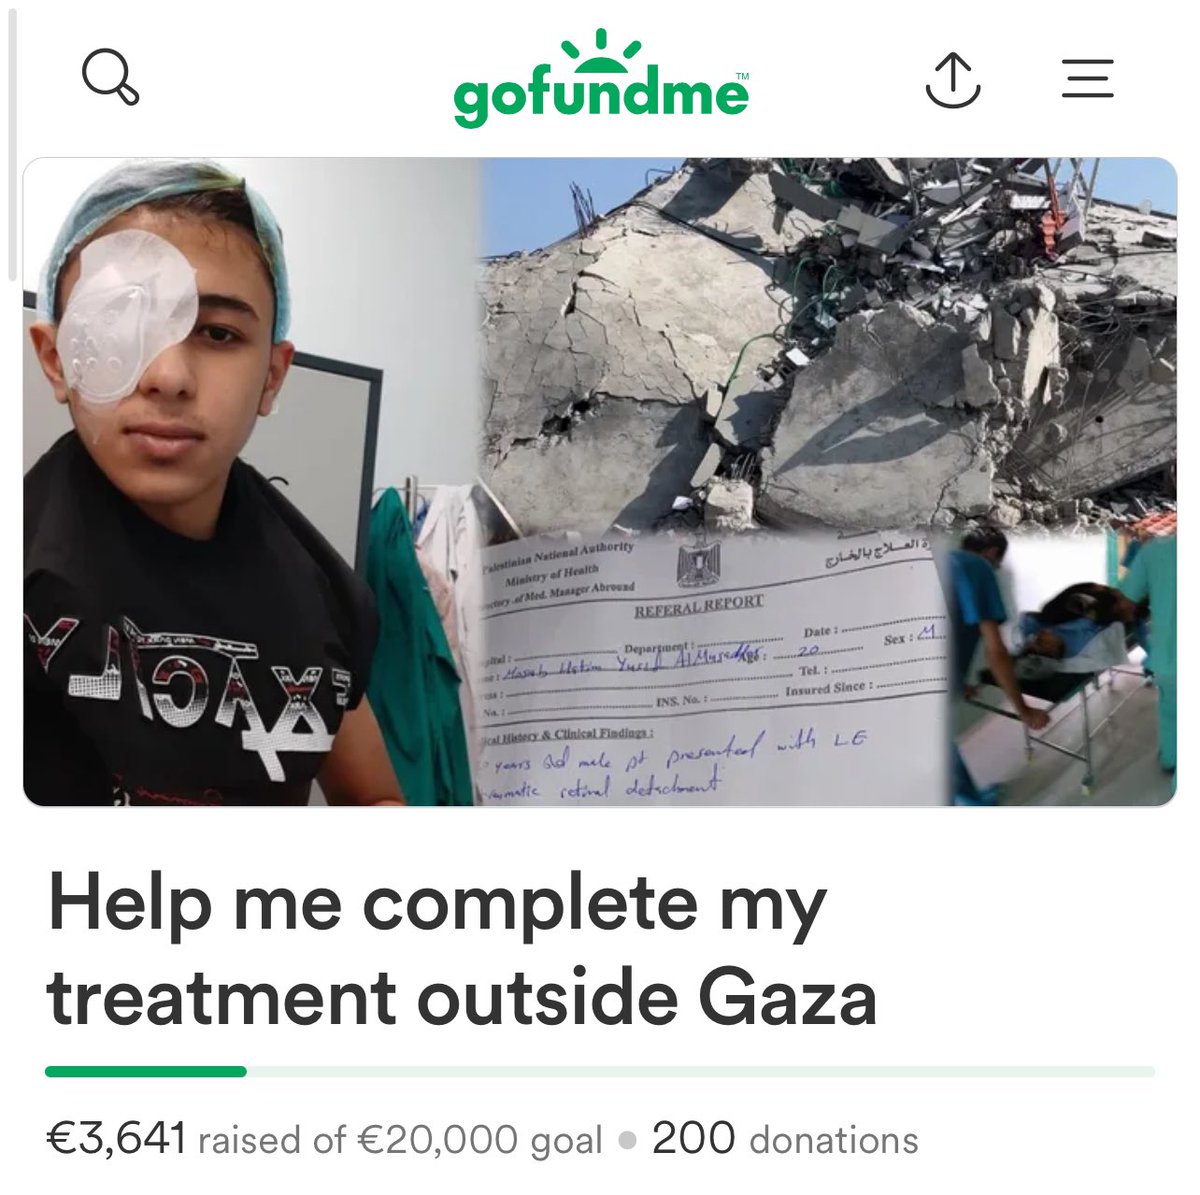 It has been 76 days since I launched my campaign. I have not achieved a quarter of the goal. Even if someone had cared about my urgent humanitarian situation, I would have saved my eyes but there is still hope. I hope you can help with anything you can do. gofundme.com/f/help-me-comp…